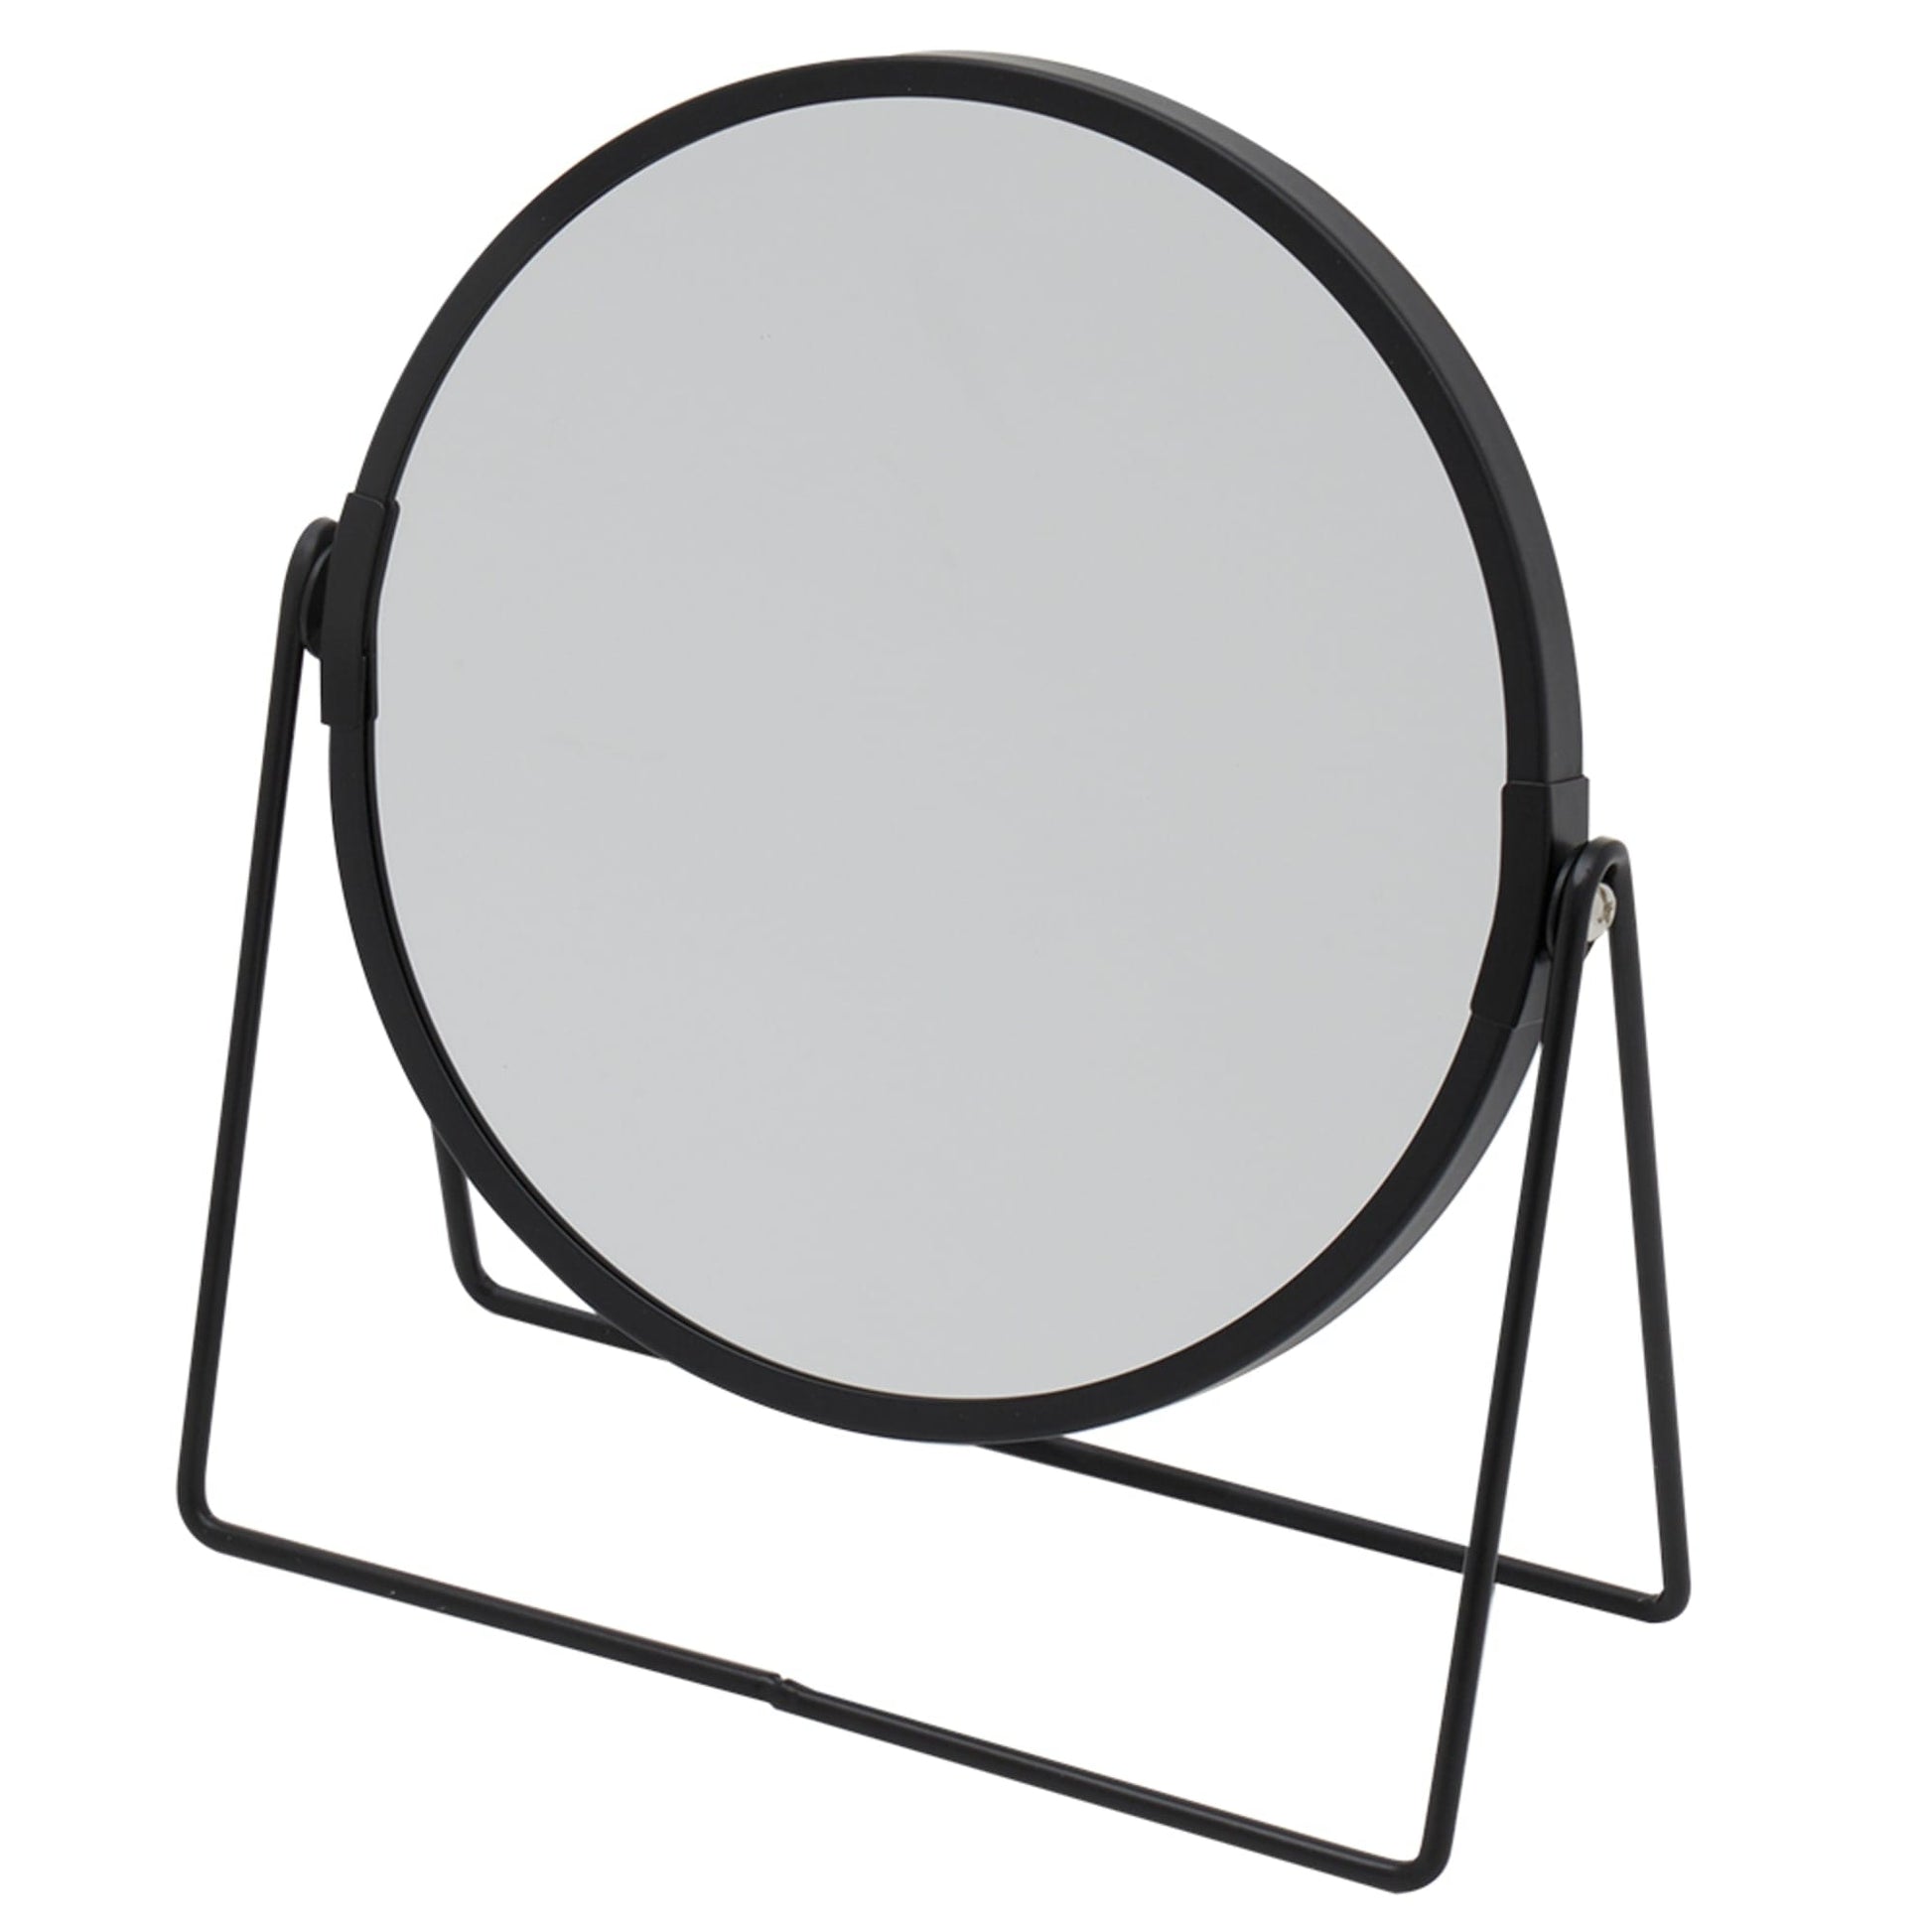 Home Basics Mini Double Sided Cosmetic Mirror, Silver